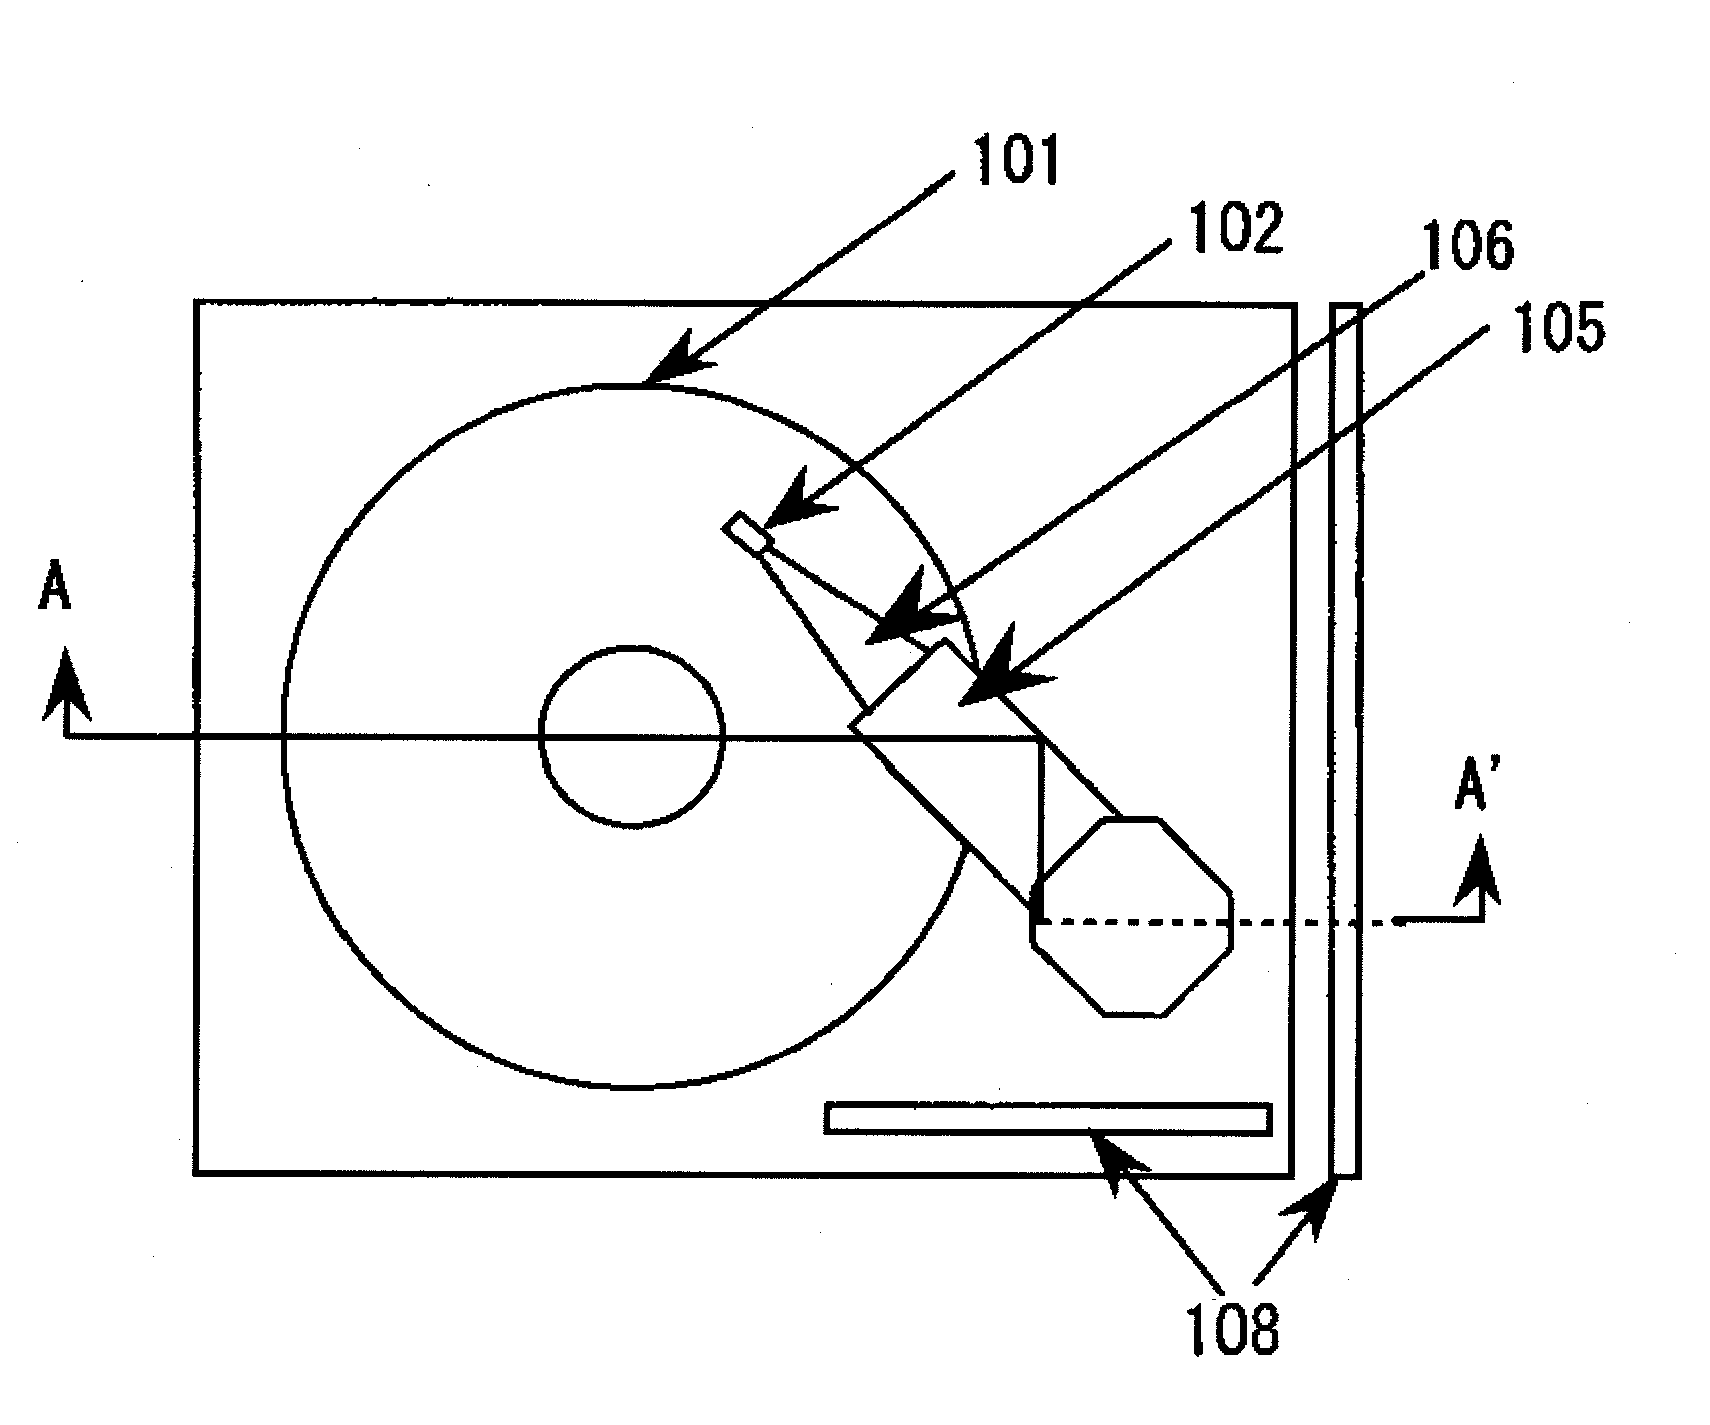 Information recording device